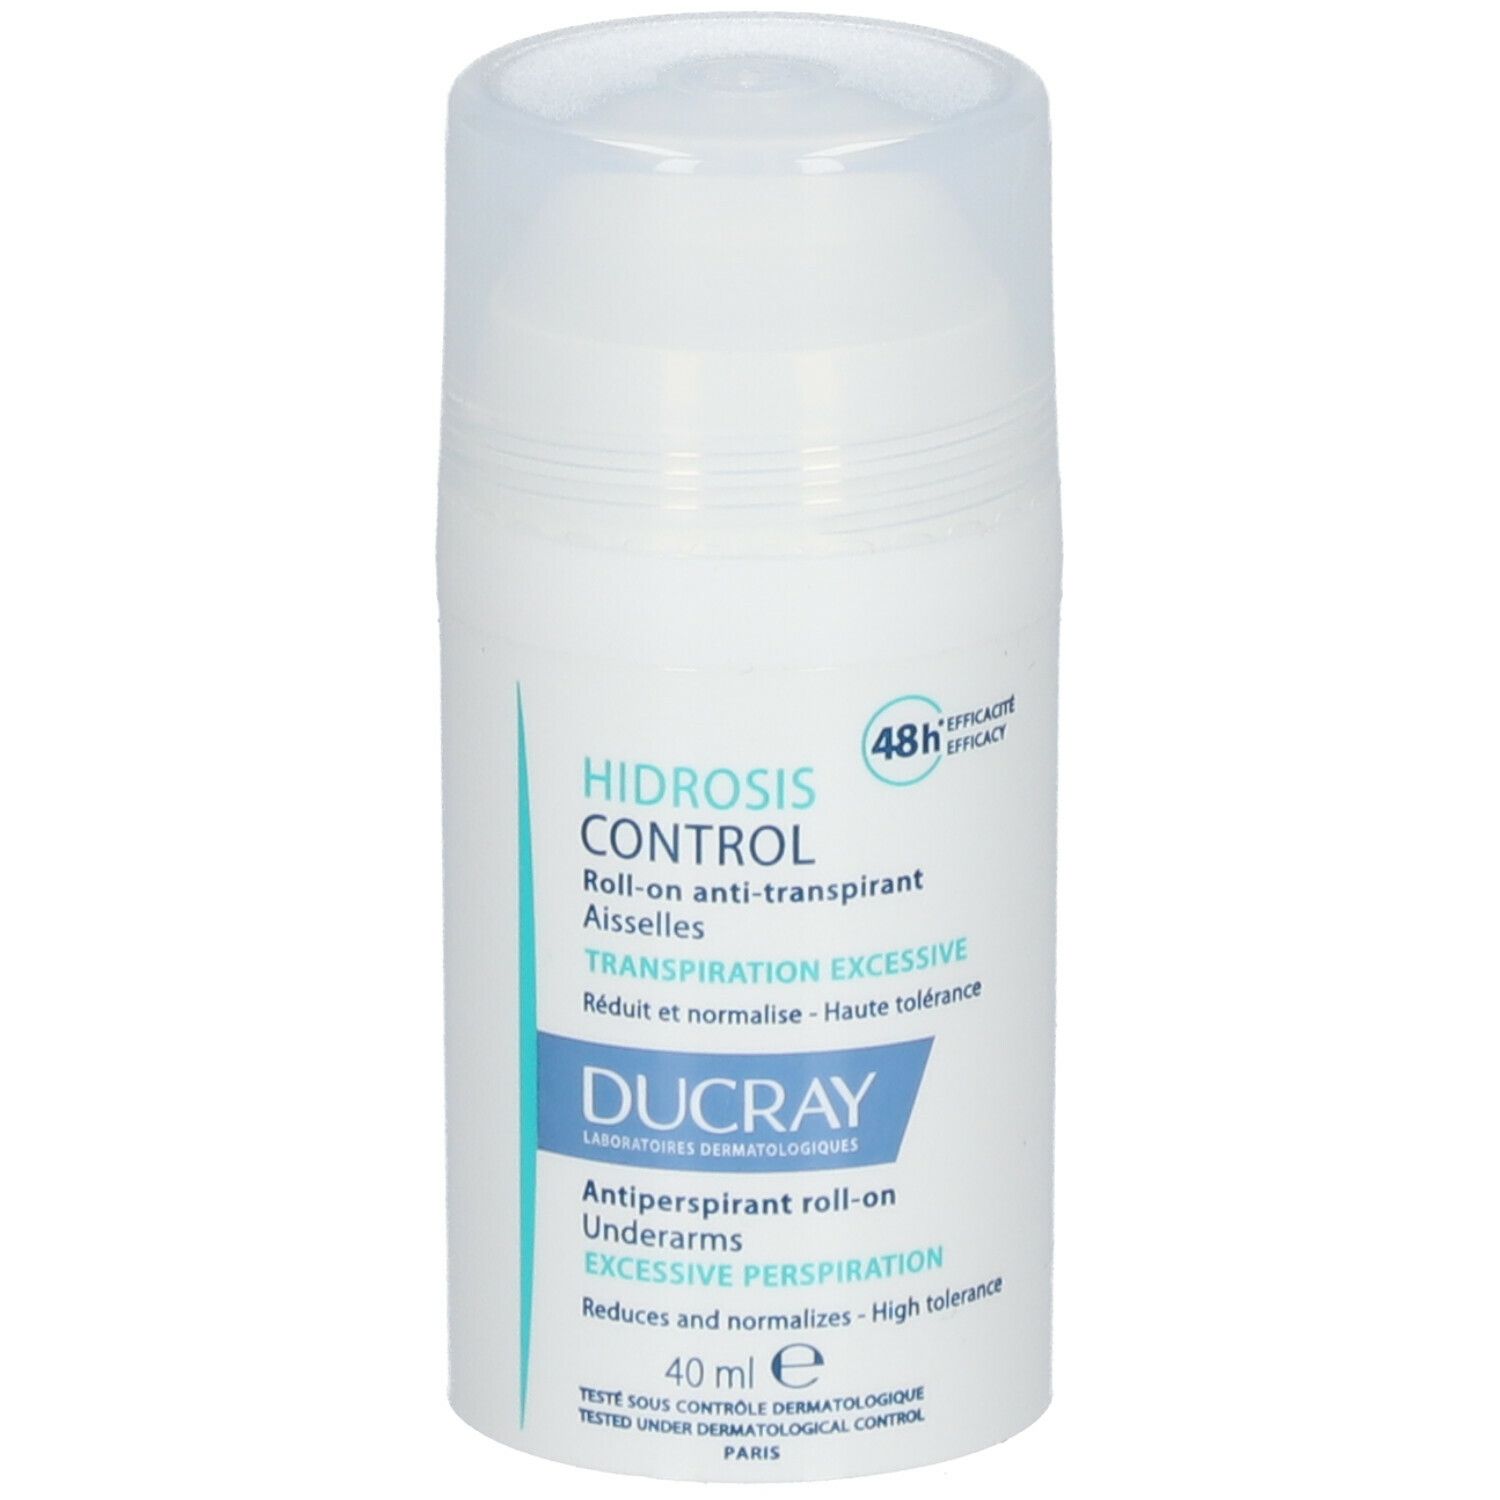 Ducray Hidrosis Control Roll-on anti-transpirant aisselles